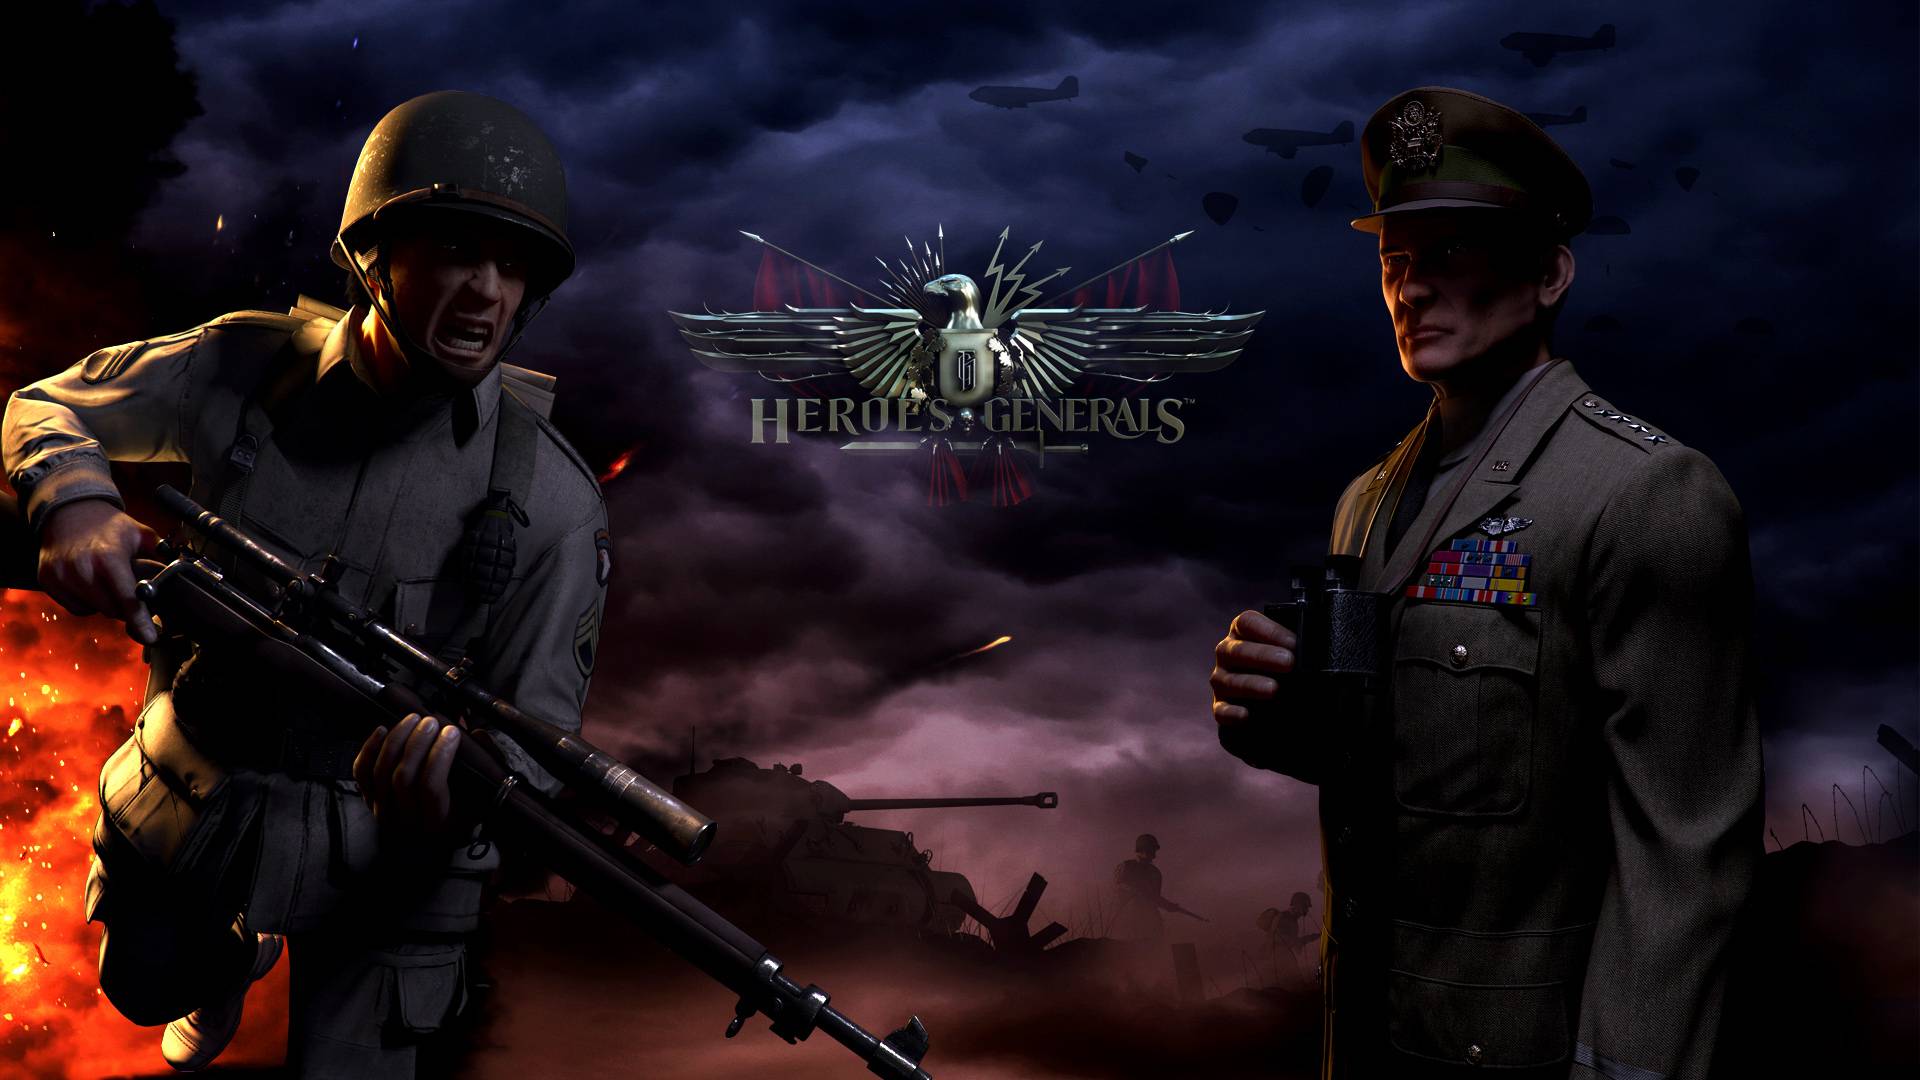 Heroes & Generals Wallpaper. Heroes & Generals Wallpaper, Heroes & Generals Background and Revolutionary General's Background